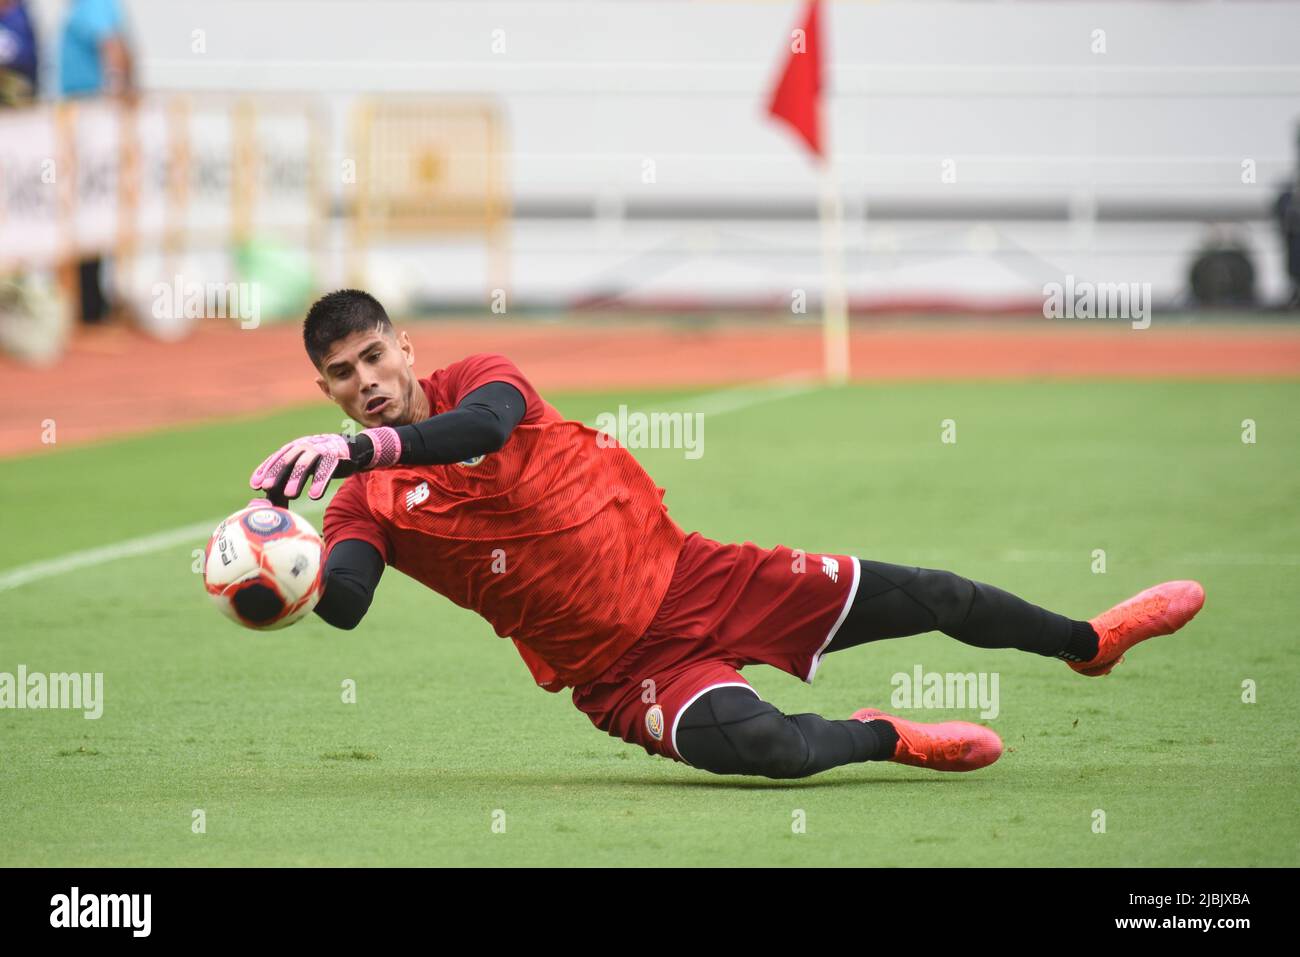 SAN JOSE, Costa Rica: Costa rican goalkeeper Aaron Cruz warms up previous to the 2-0 Costa Rica victory over Martinique on June 5th, 2022. A first-hal Stock Photo